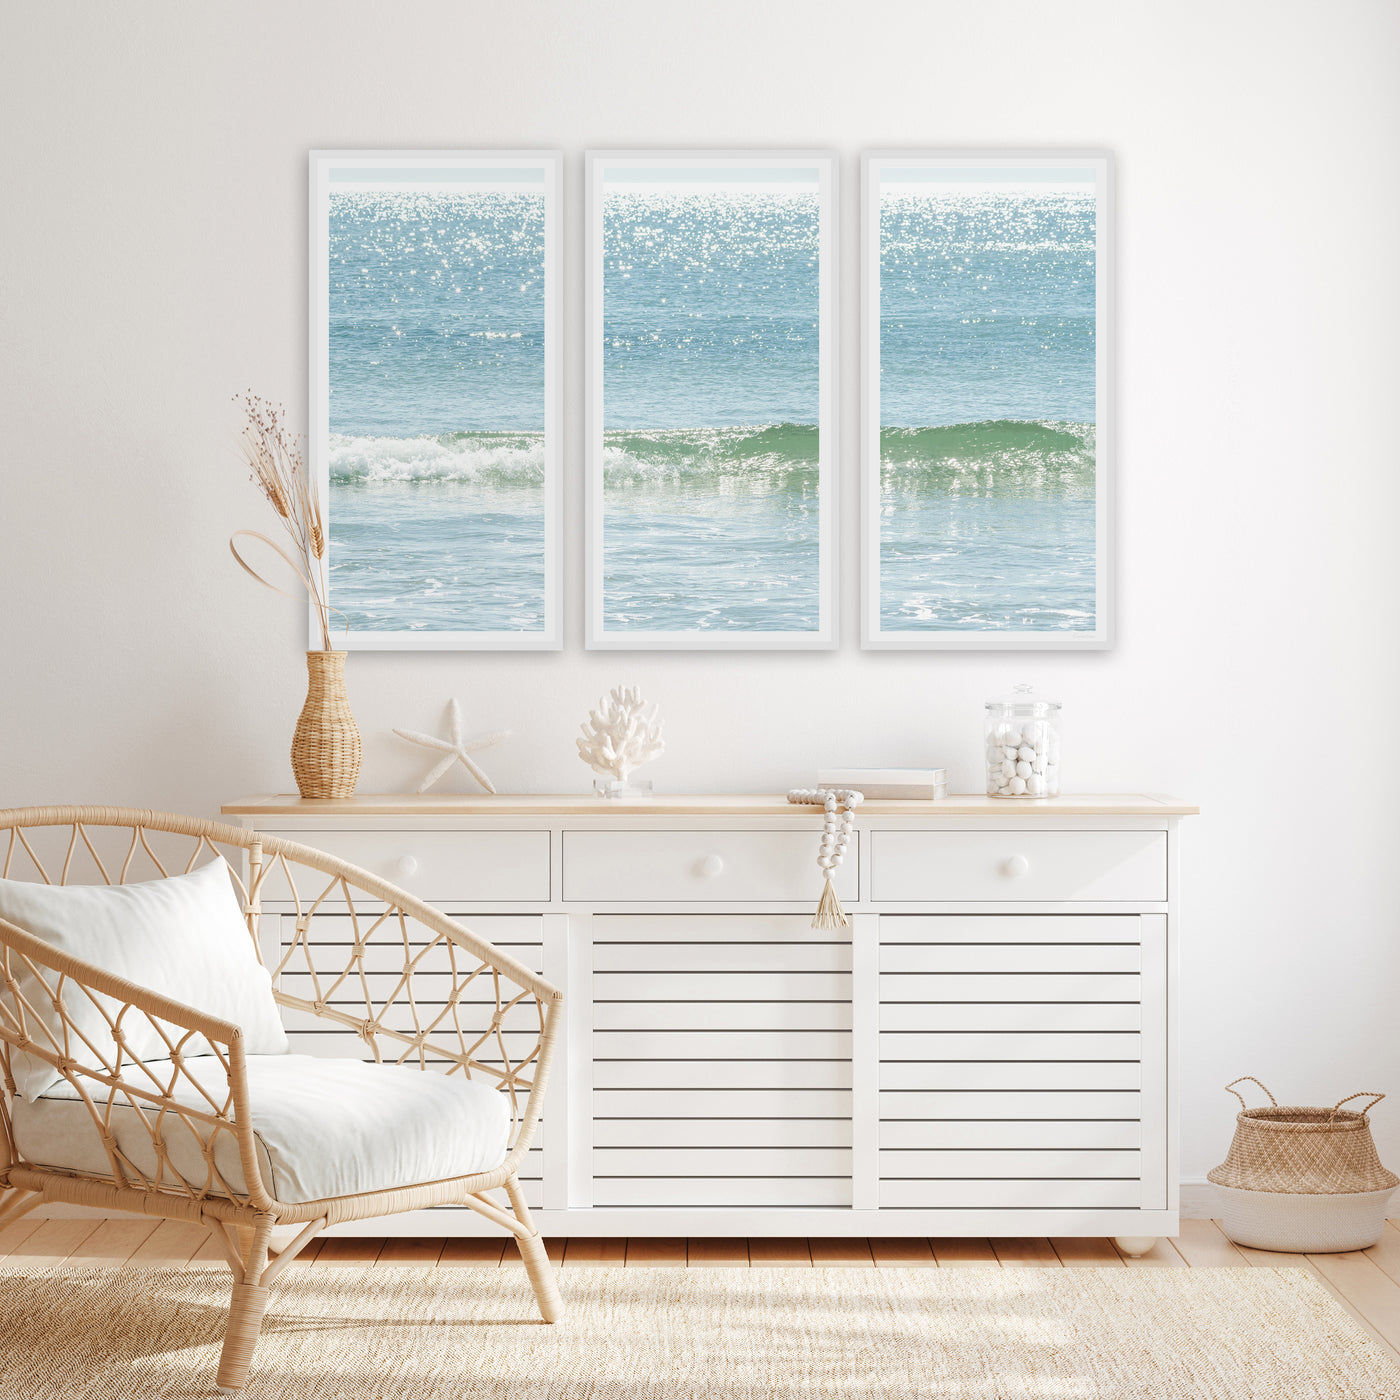 Ocean Waves No 11 - 3 piece wall art framed prints by Cattie Coyle Photography above beach house dresser